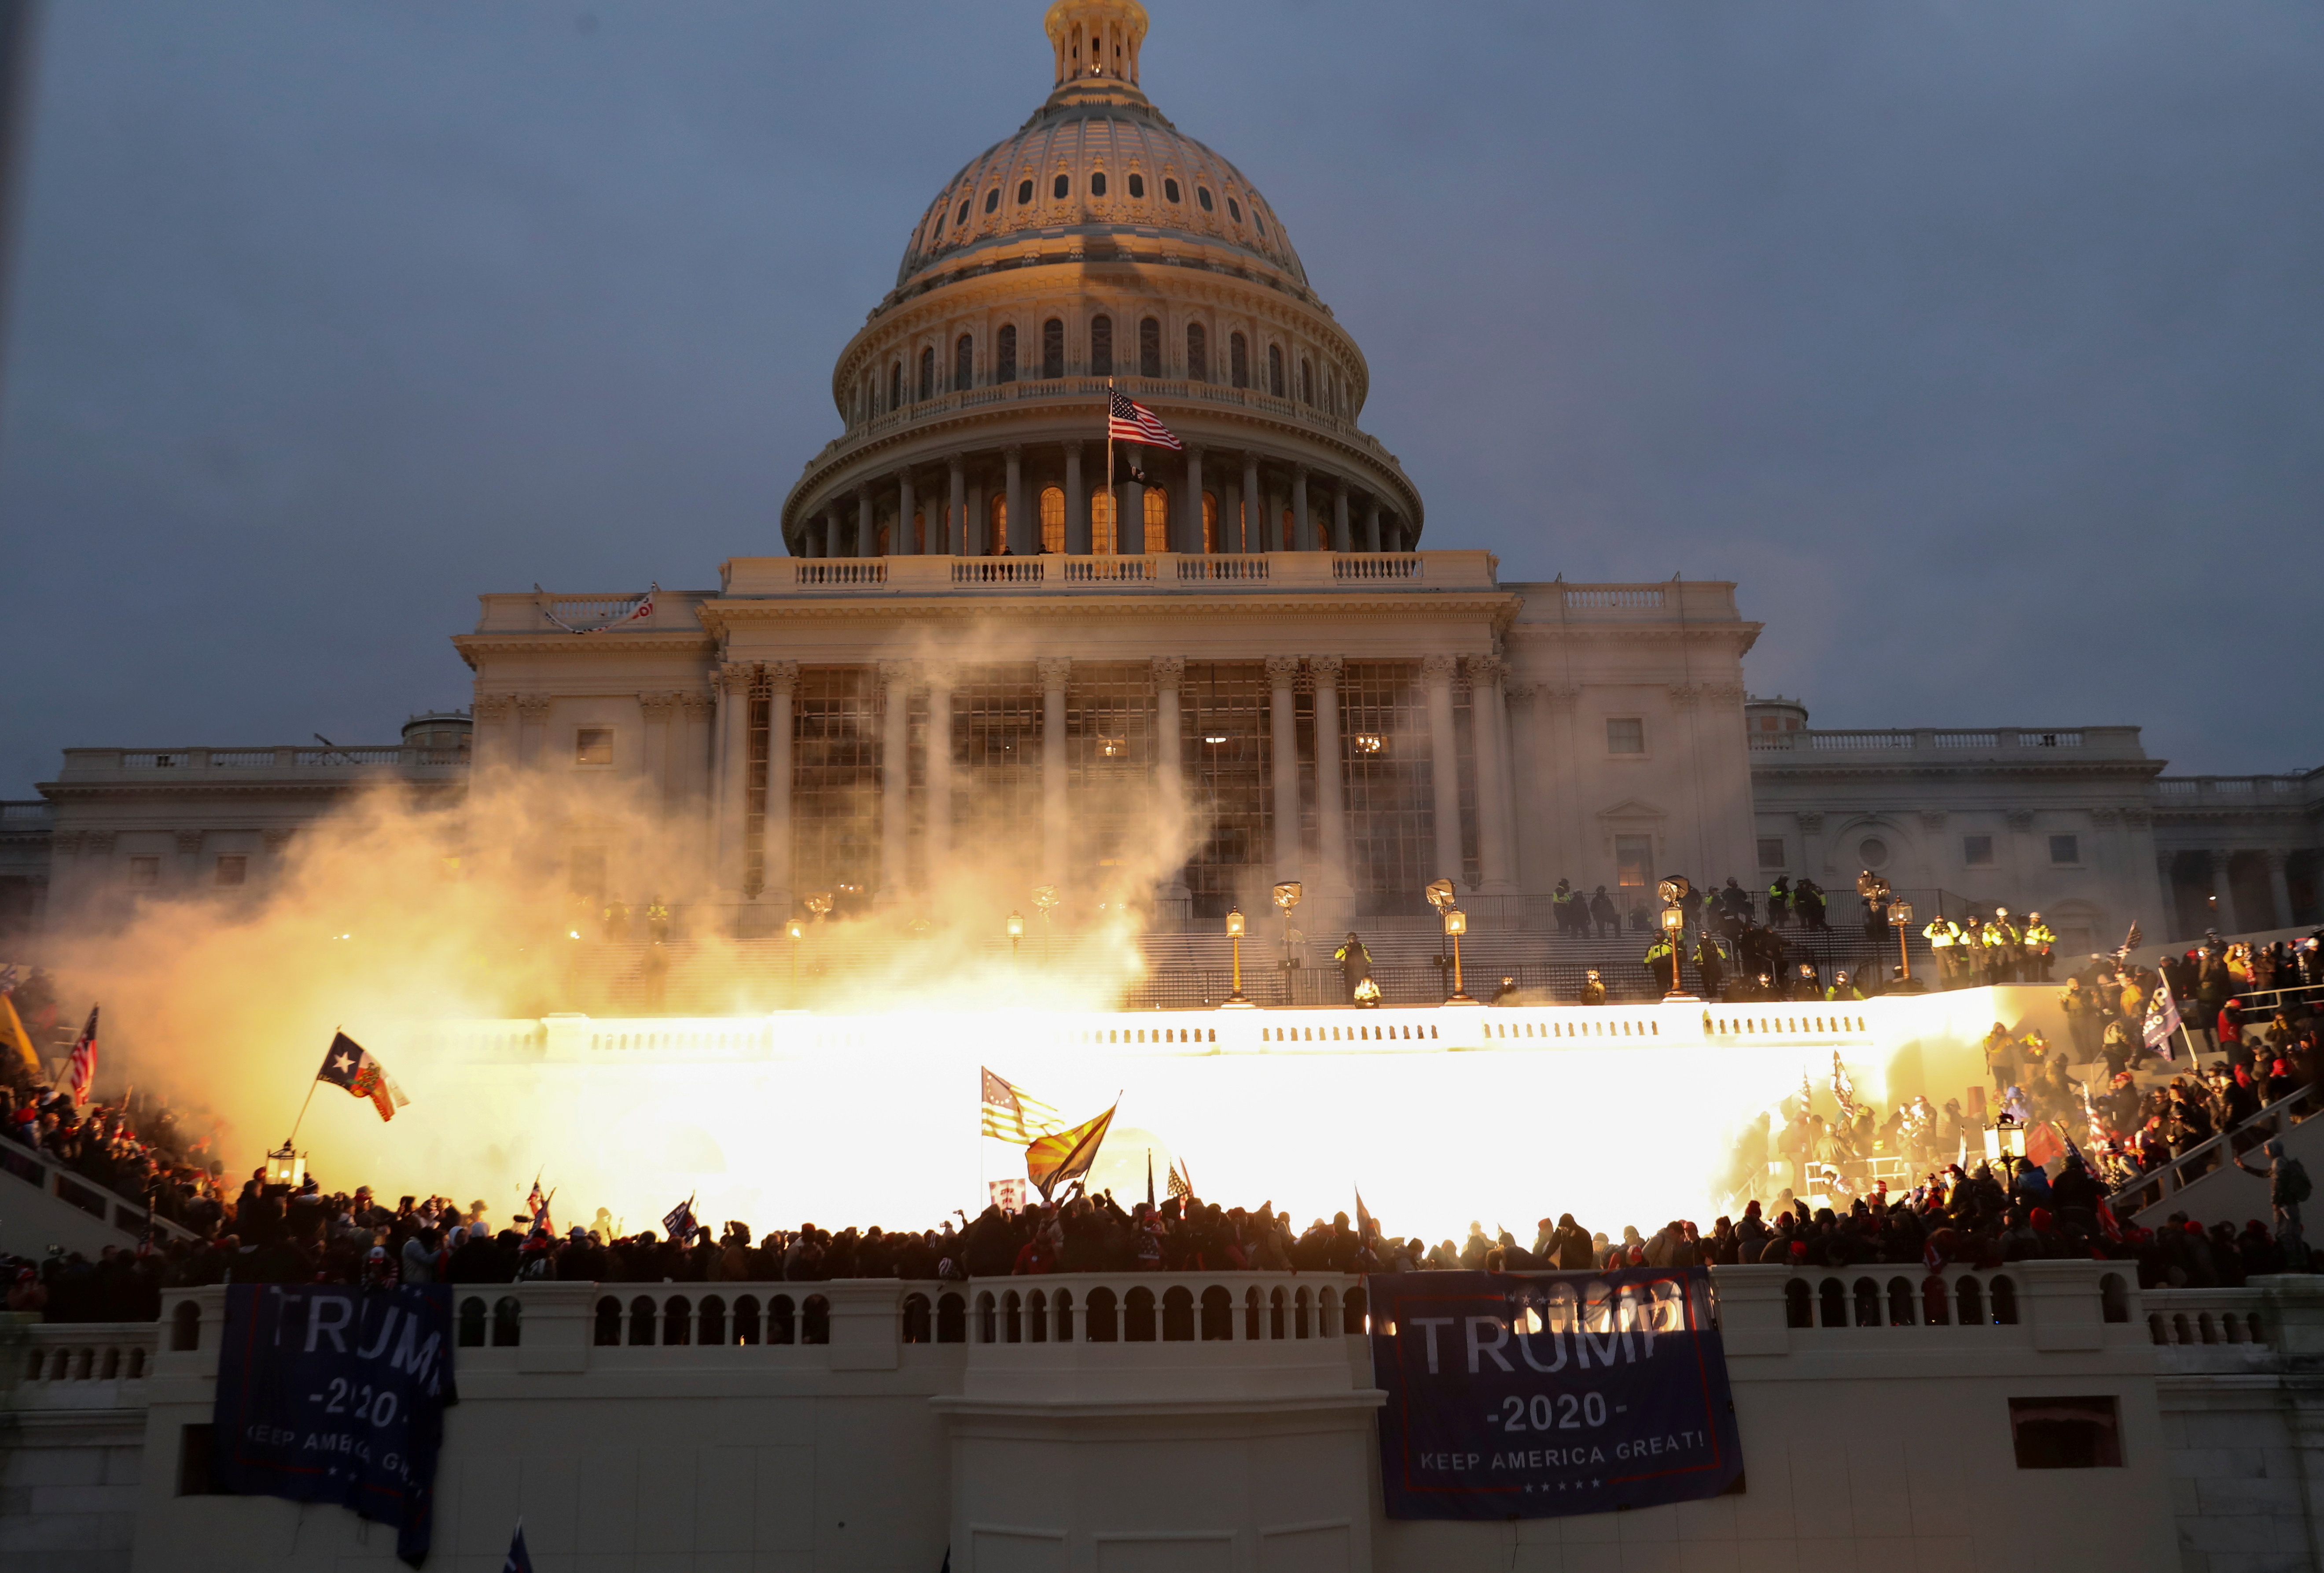 An explosion caused by a police munition is seen while supporters of U.S. President Donald Trump gather in front of the U.S. Capitol Building in Washington, DC, on January 6, 2021.